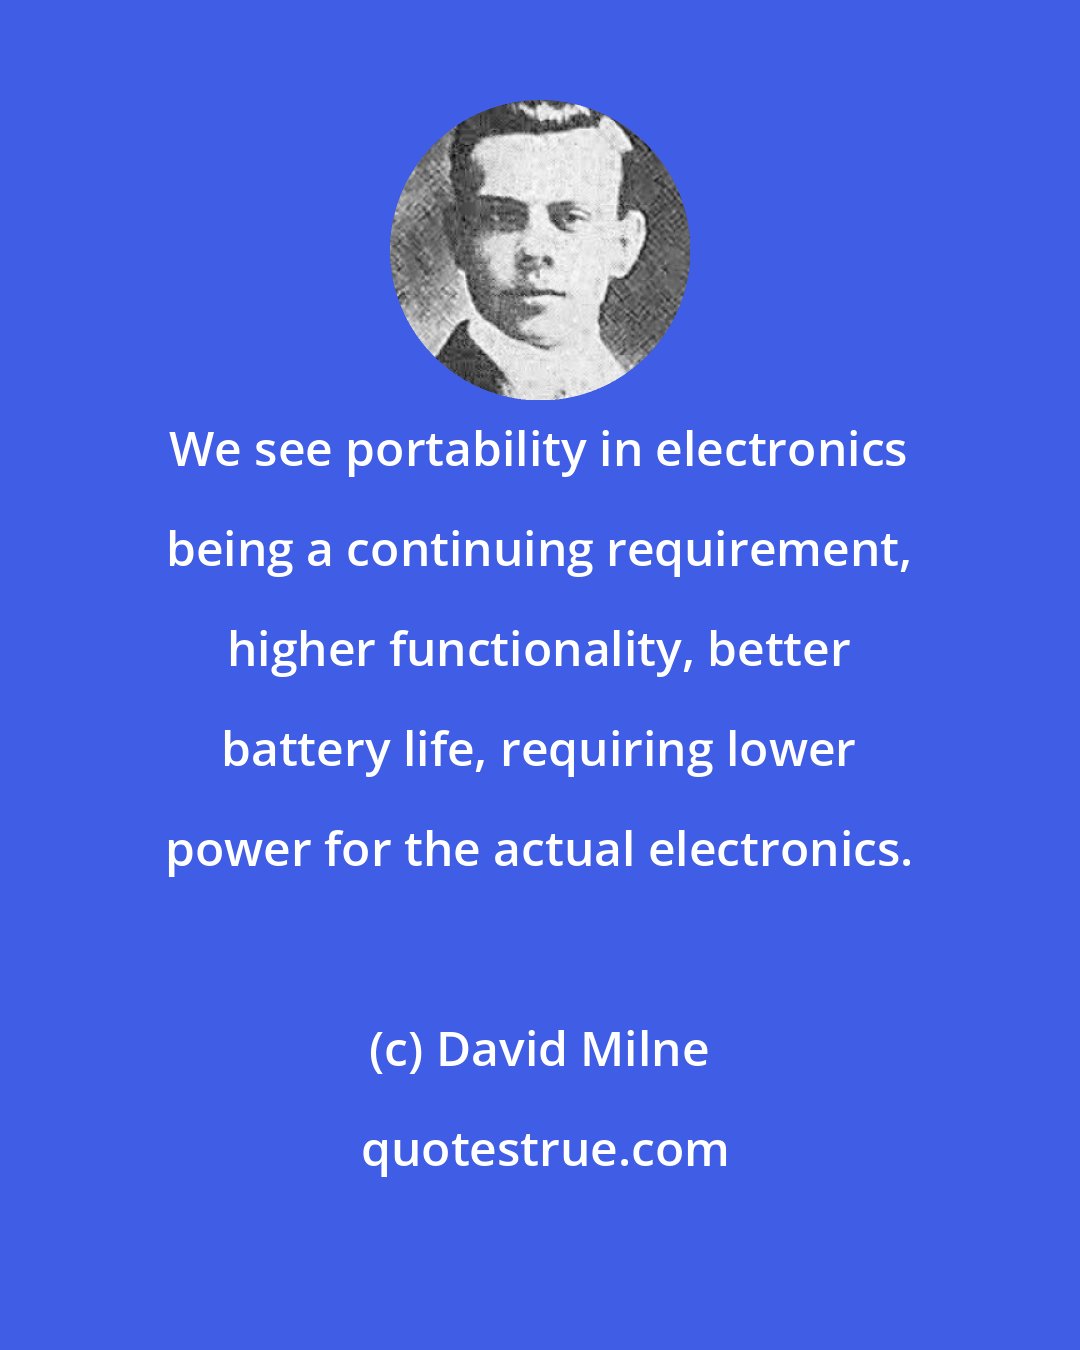 David Milne: We see portability in electronics being a continuing requirement, higher functionality, better battery life, requiring lower power for the actual electronics.